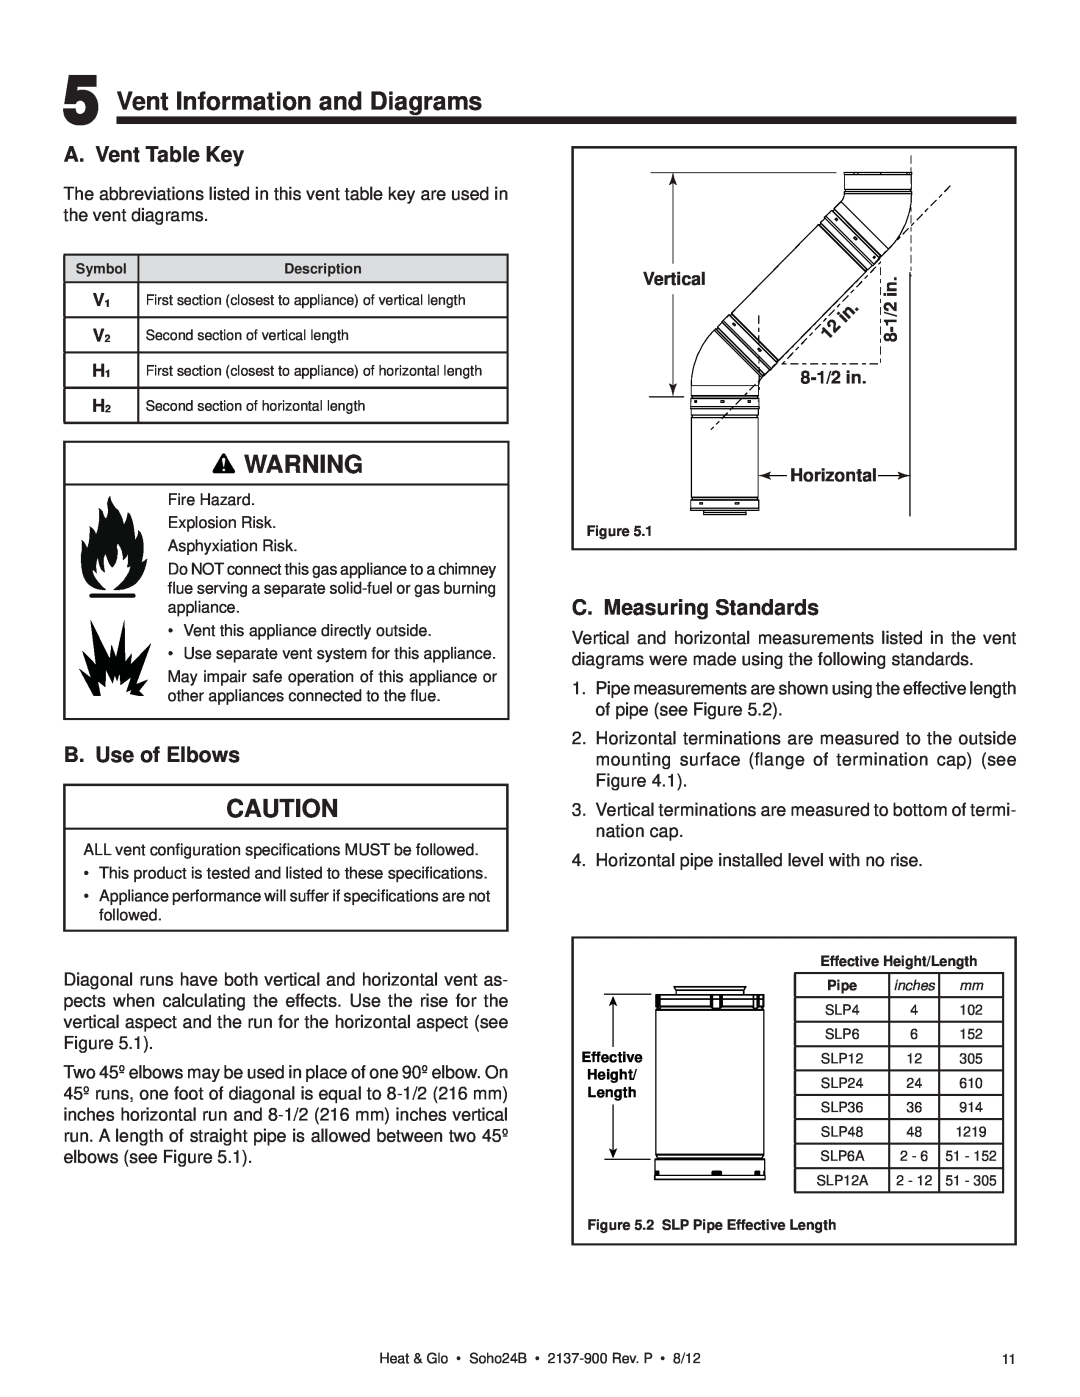 Heat & Glo LifeStyle 2137-900 Vent Information and Diagrams, A. Vent Table Key, B. Use of Elbows, C. Measuring Standards 